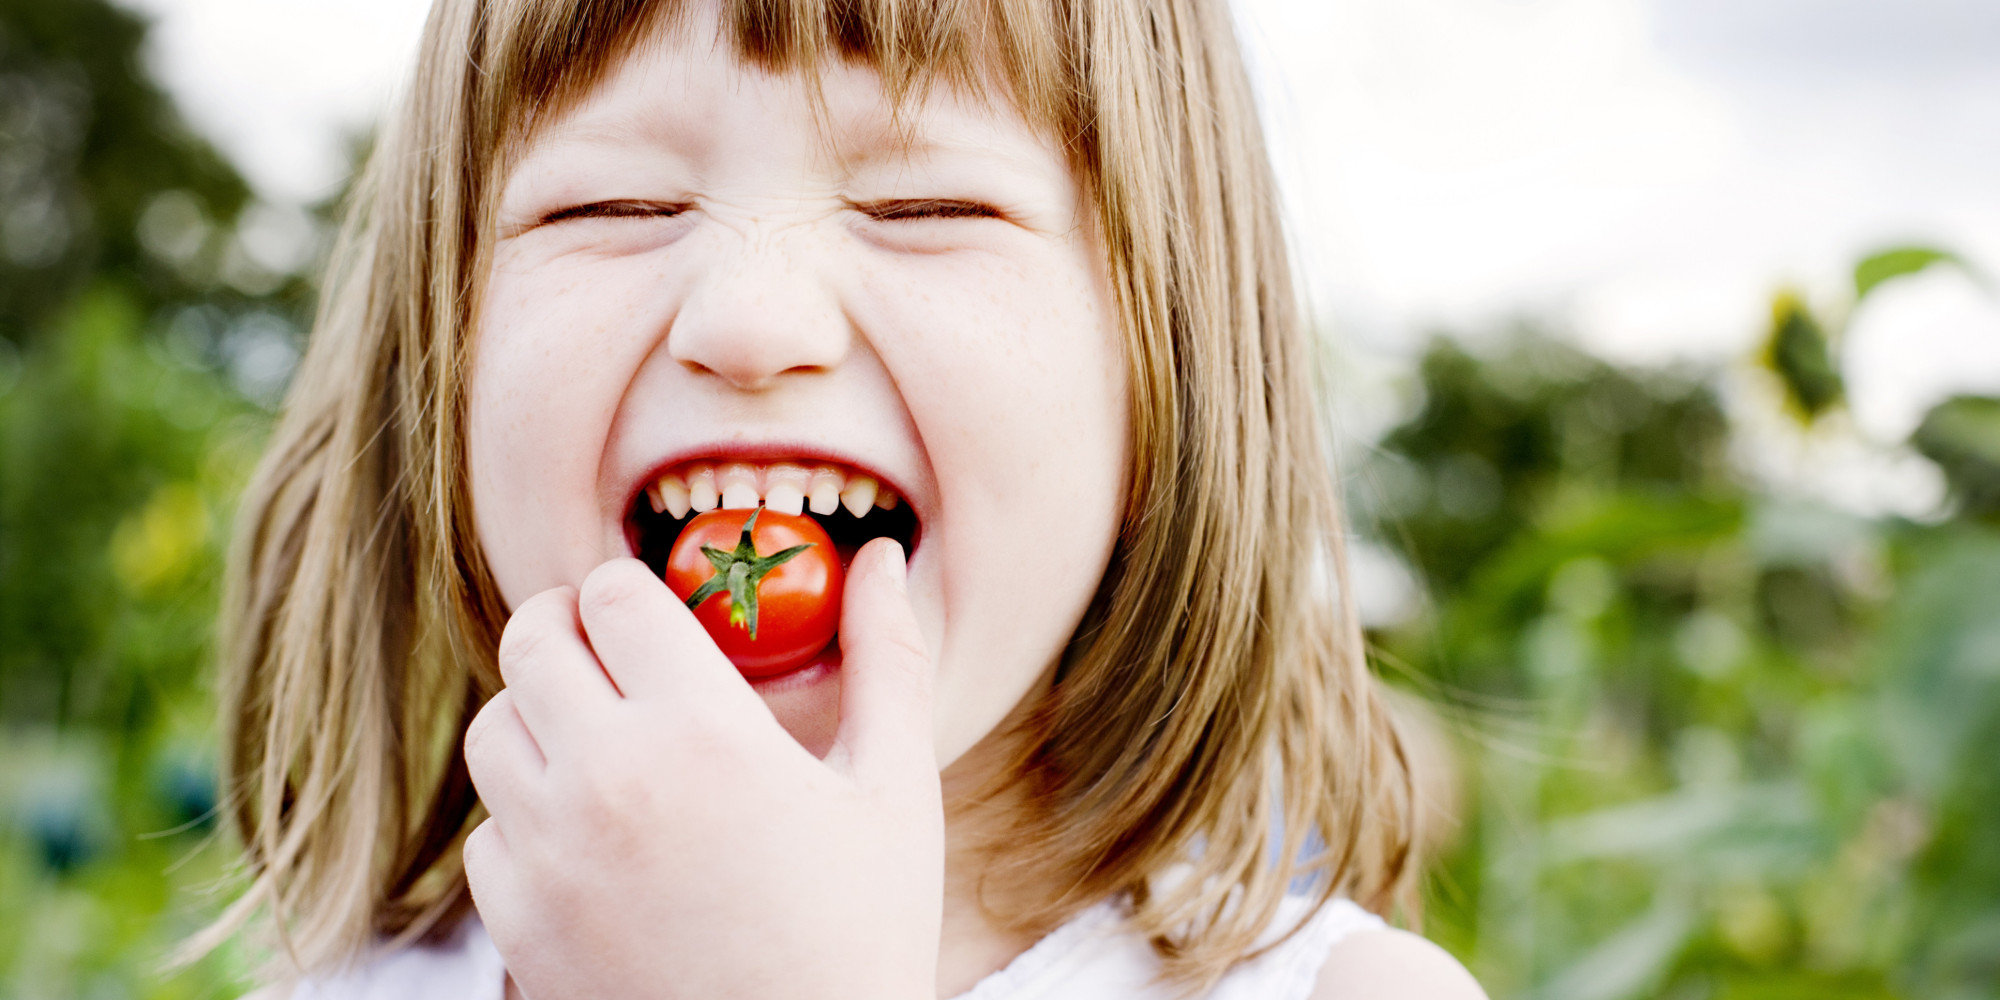 4 Skills Our Children Learn When They Eat Healthier | HuffPost